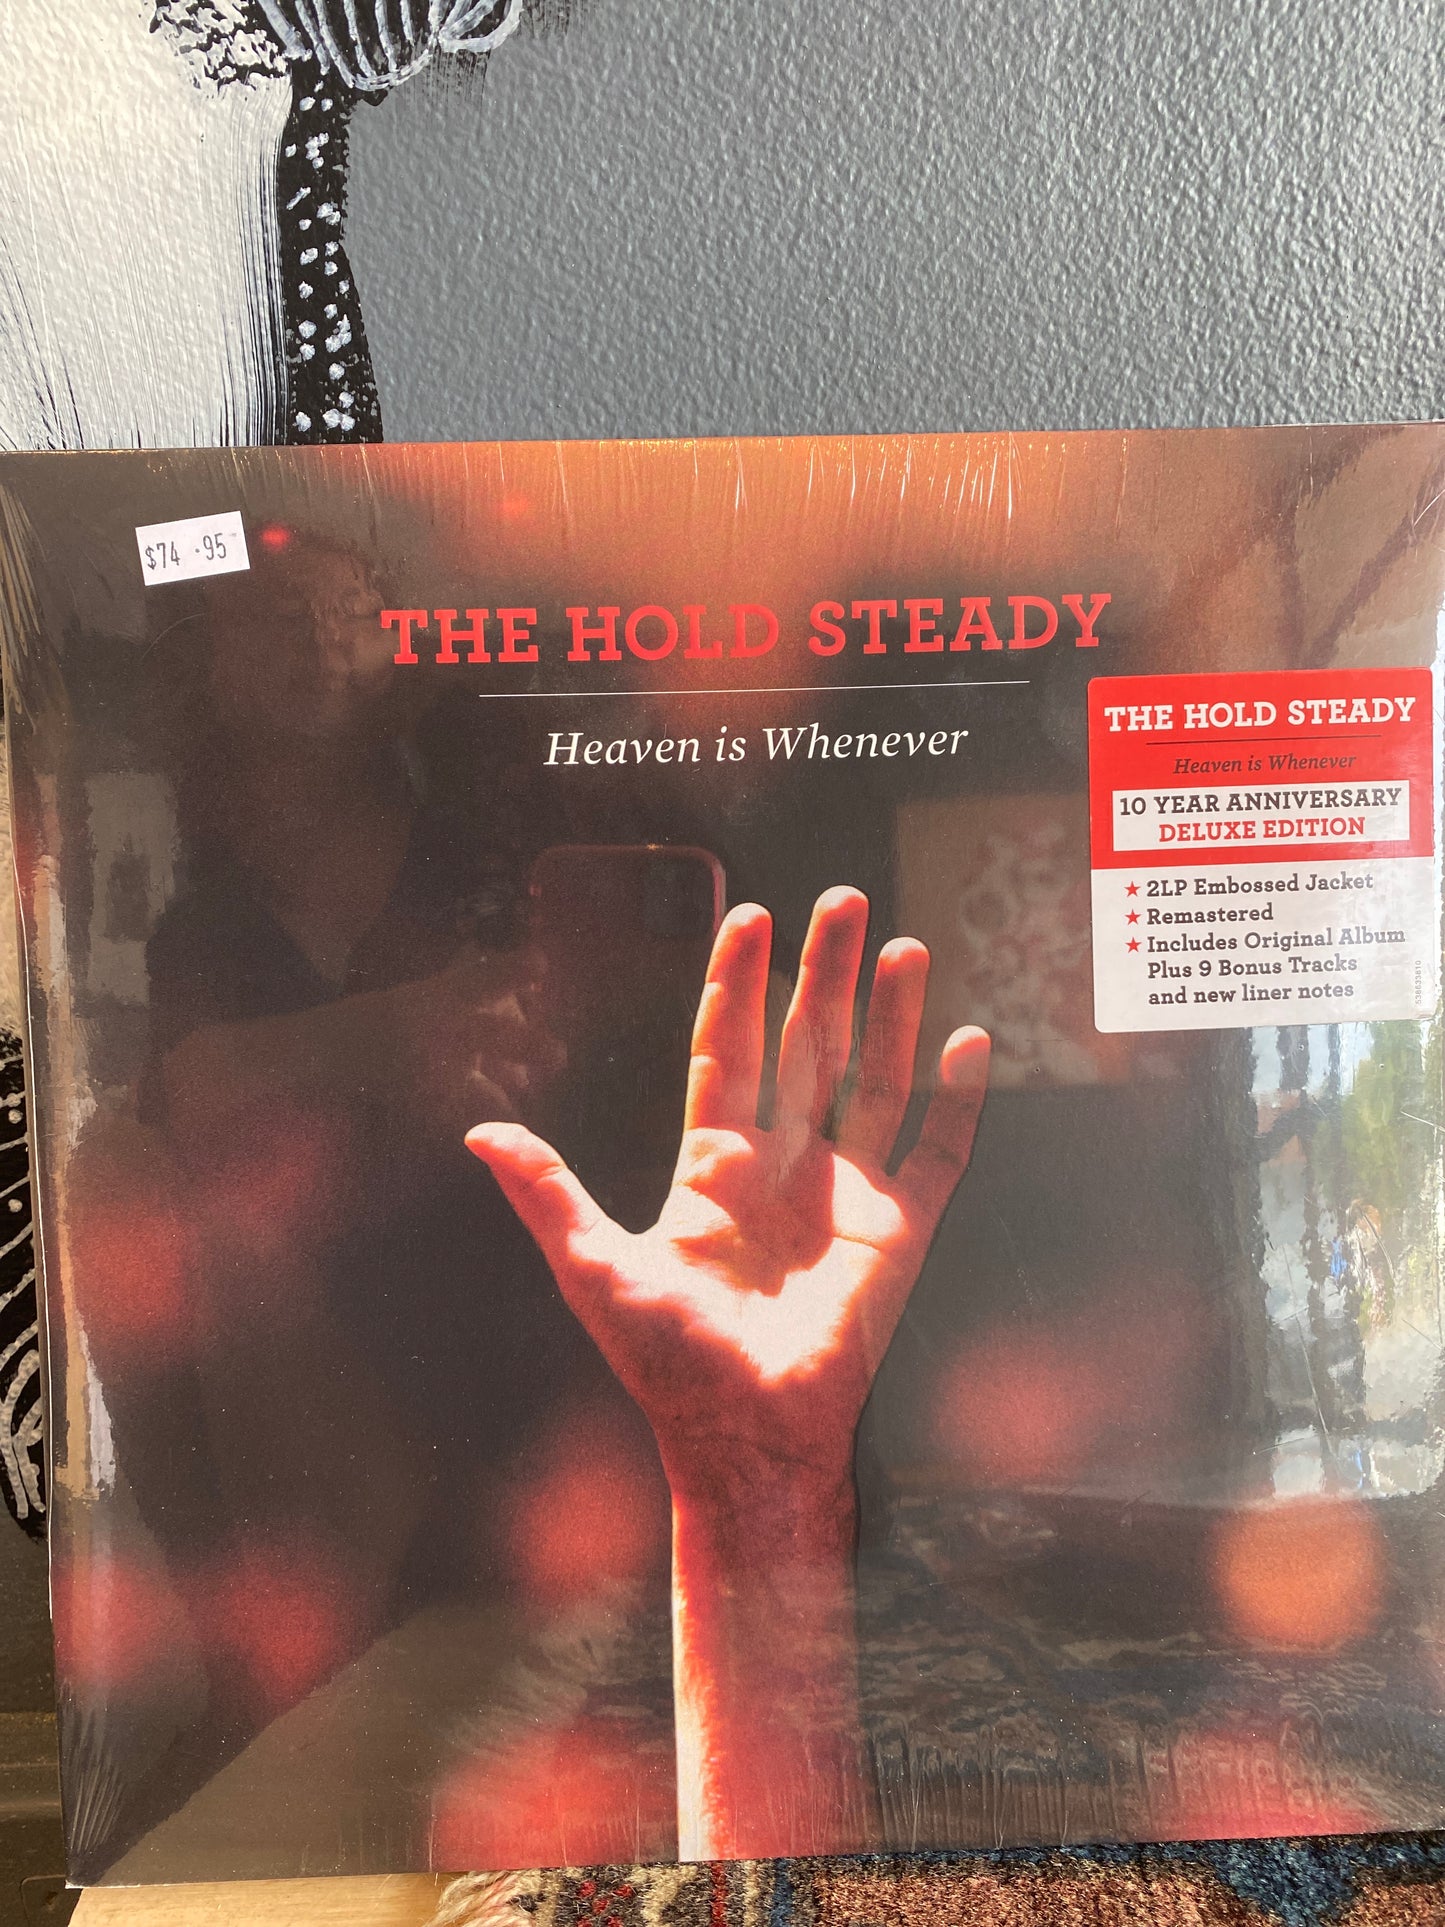 The Hold Steady - Heaven is Whenever - 10 Year Edition Vinyl LP